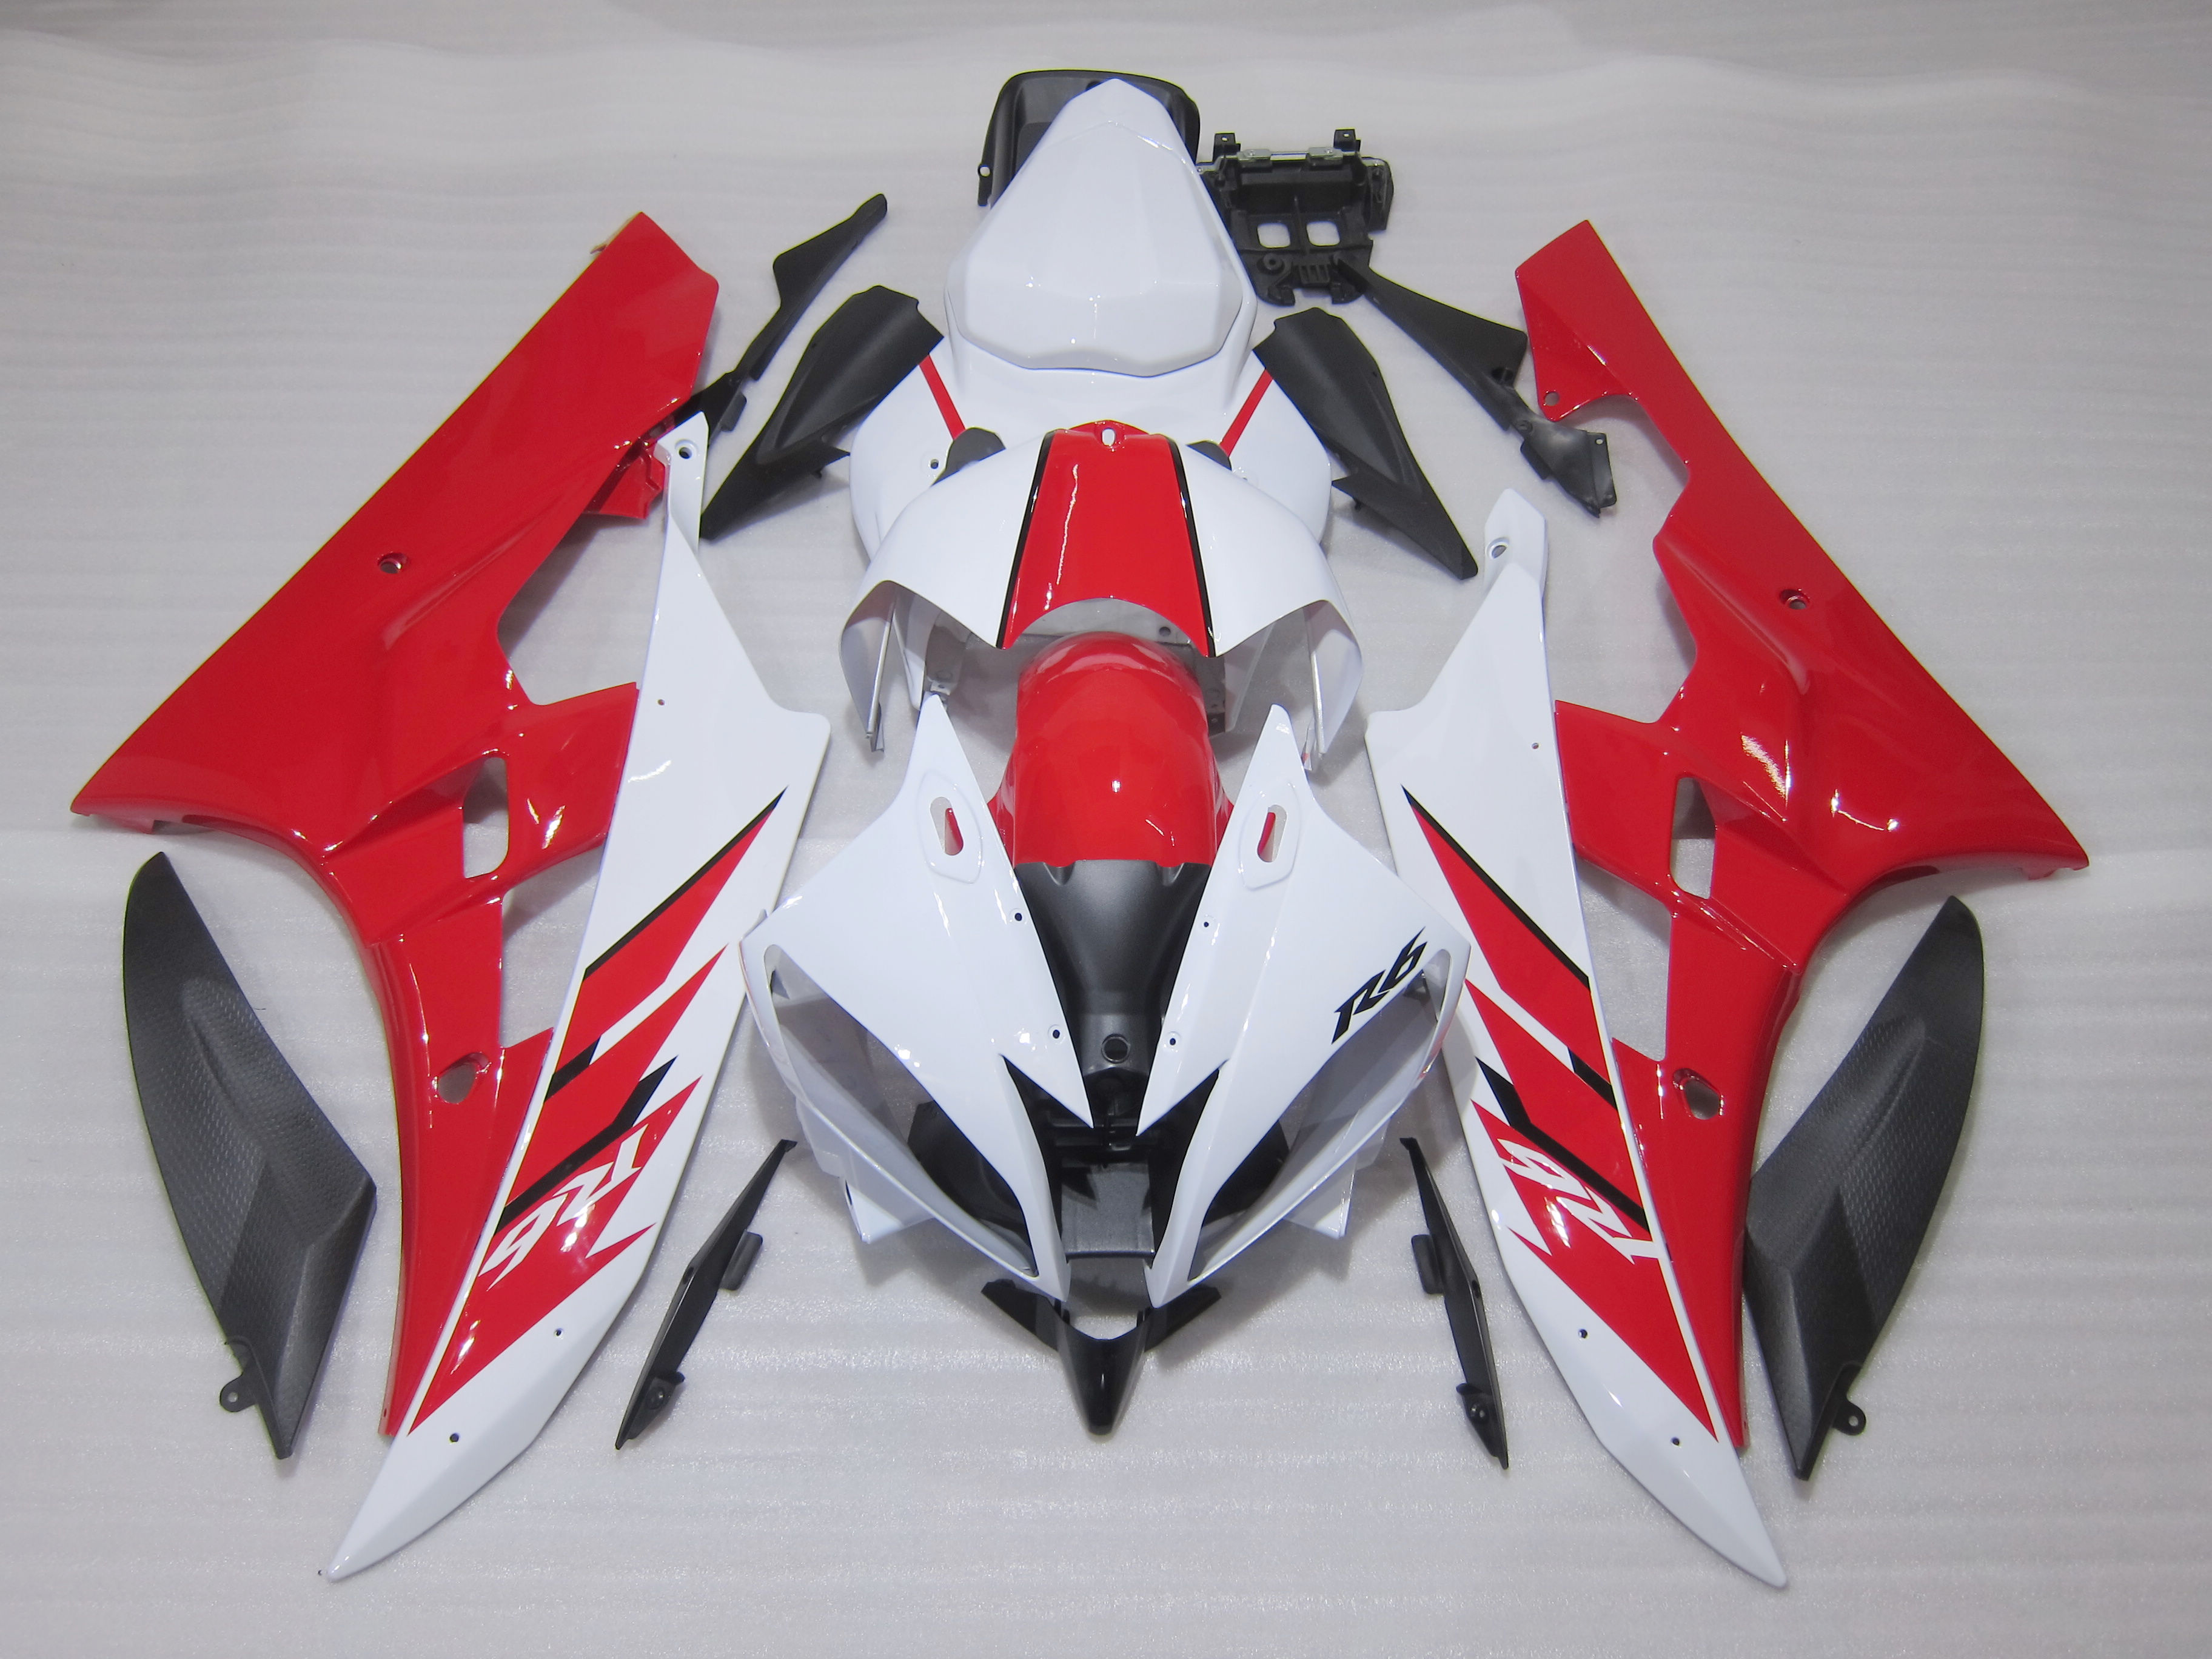 

Injection molding free customize fairing kit for Yamaha YZF R6 06 07 red white black fairings set YZFR6 2006 2007 OT36, Same as picture